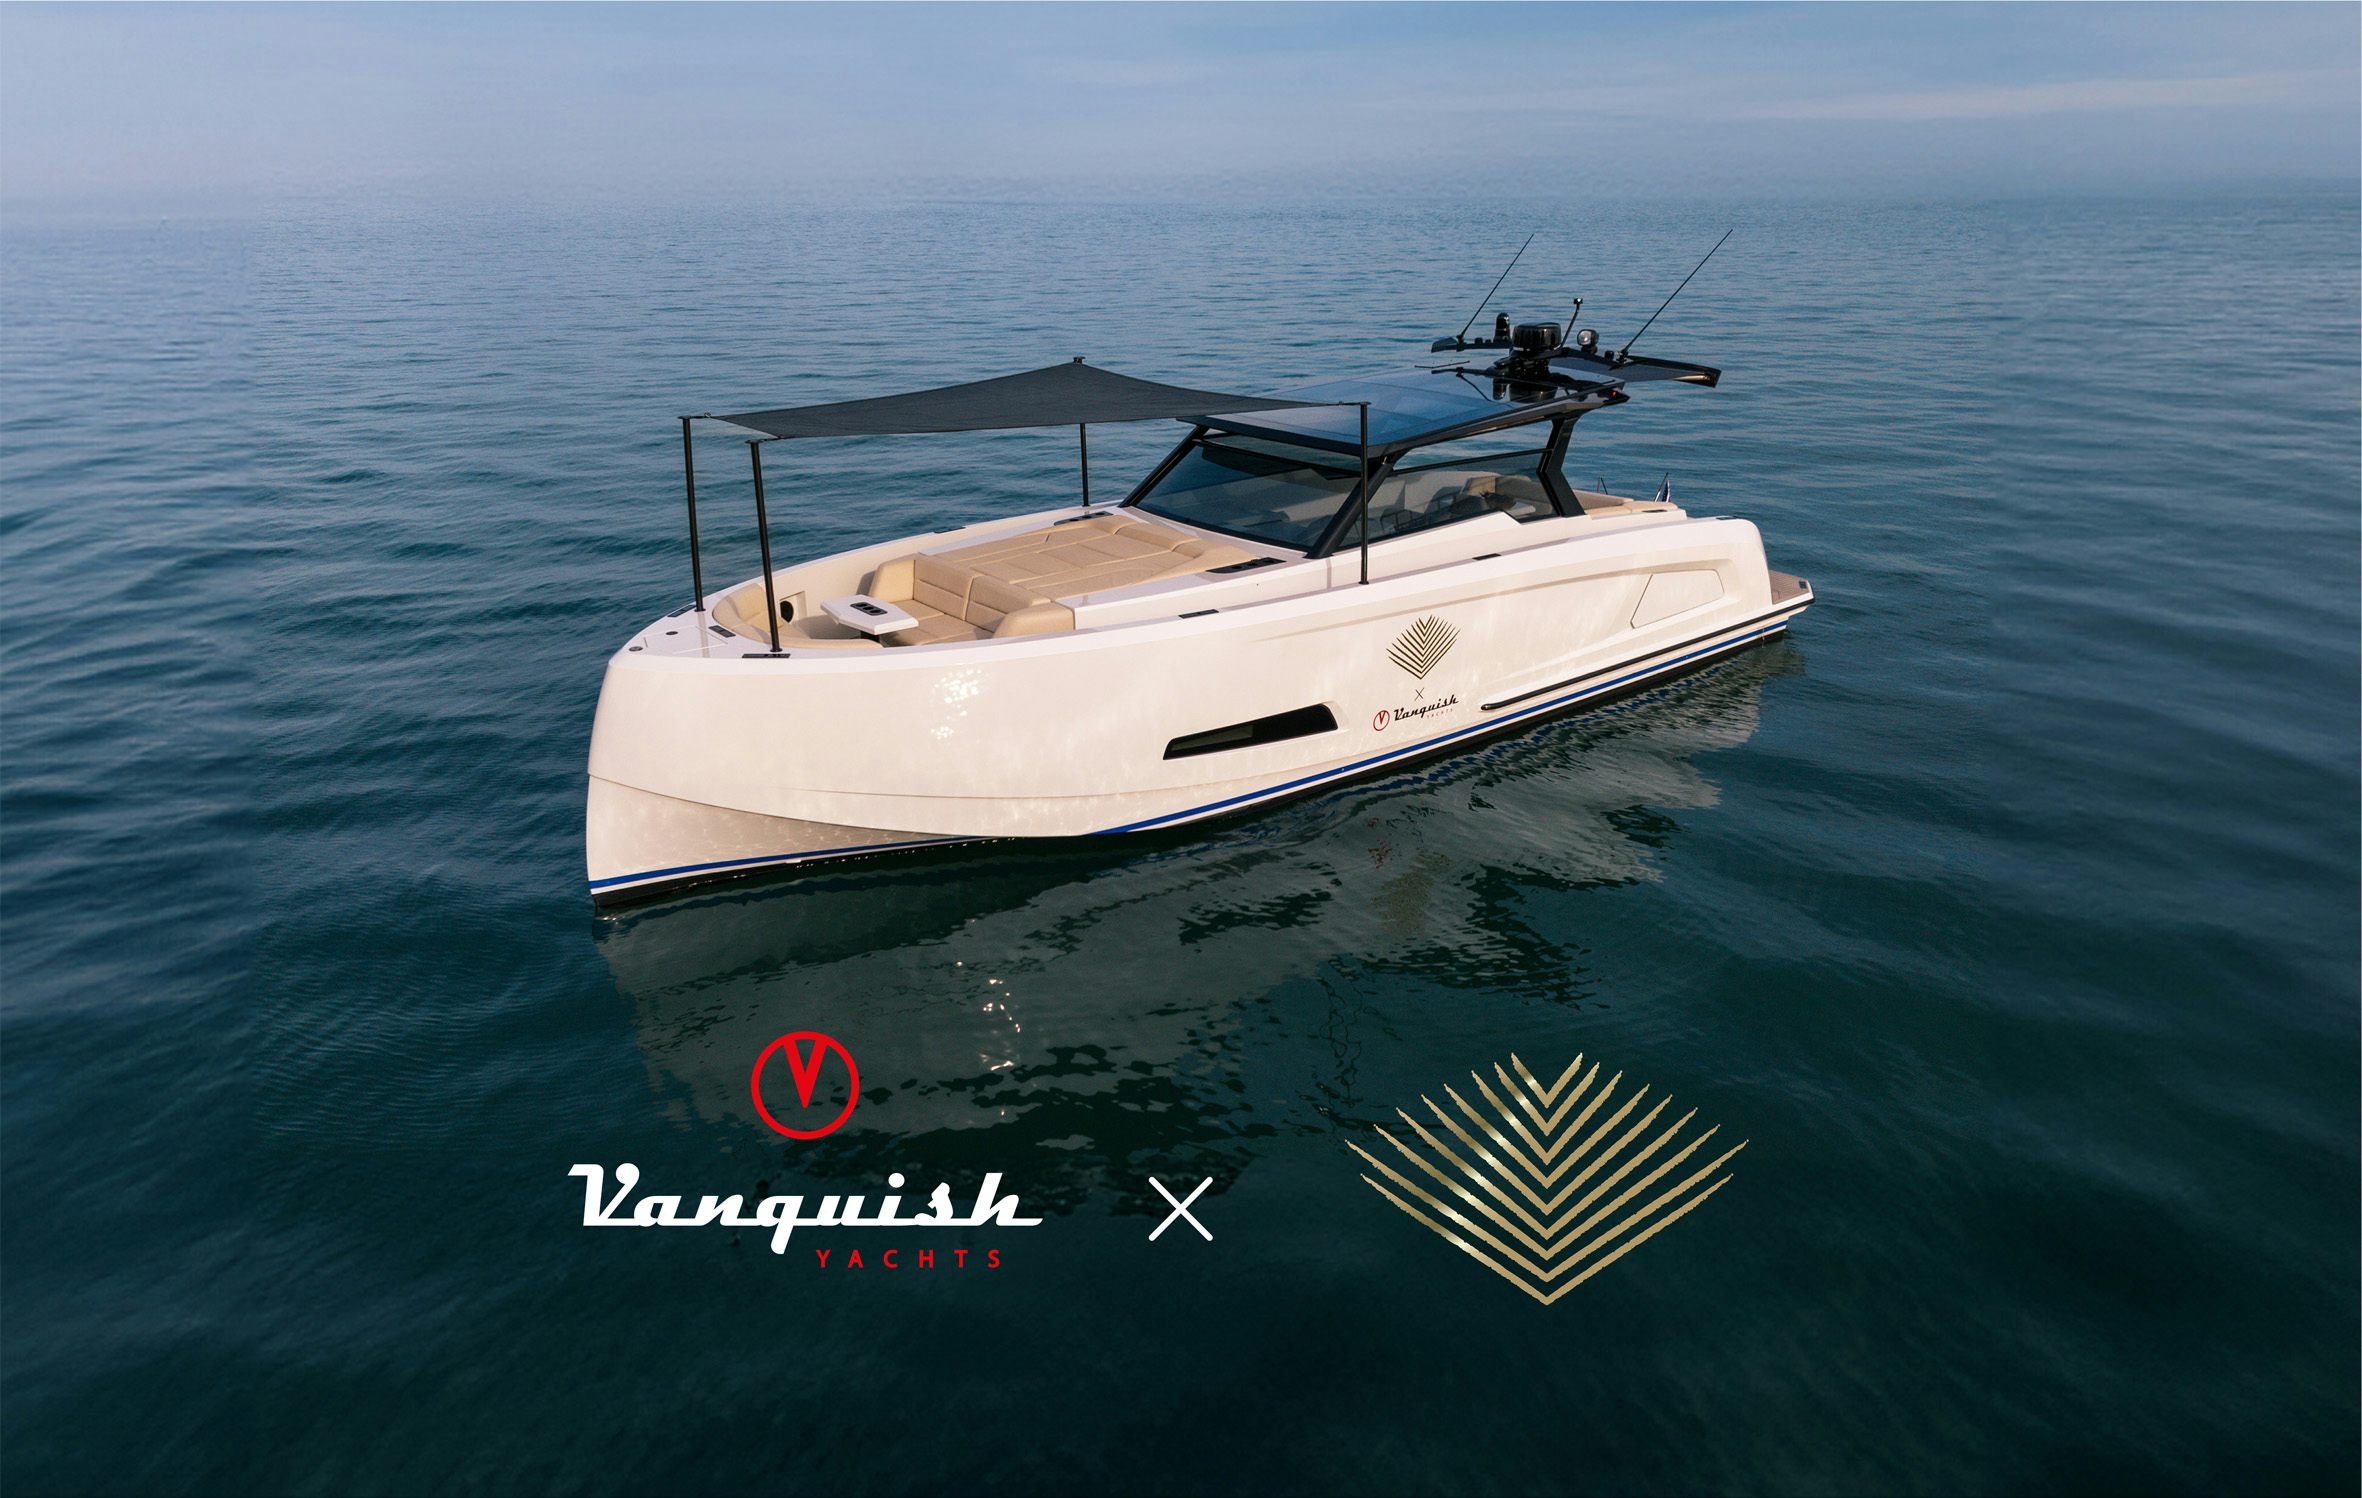 Vanquish and MM join forces in luxurious experiences.